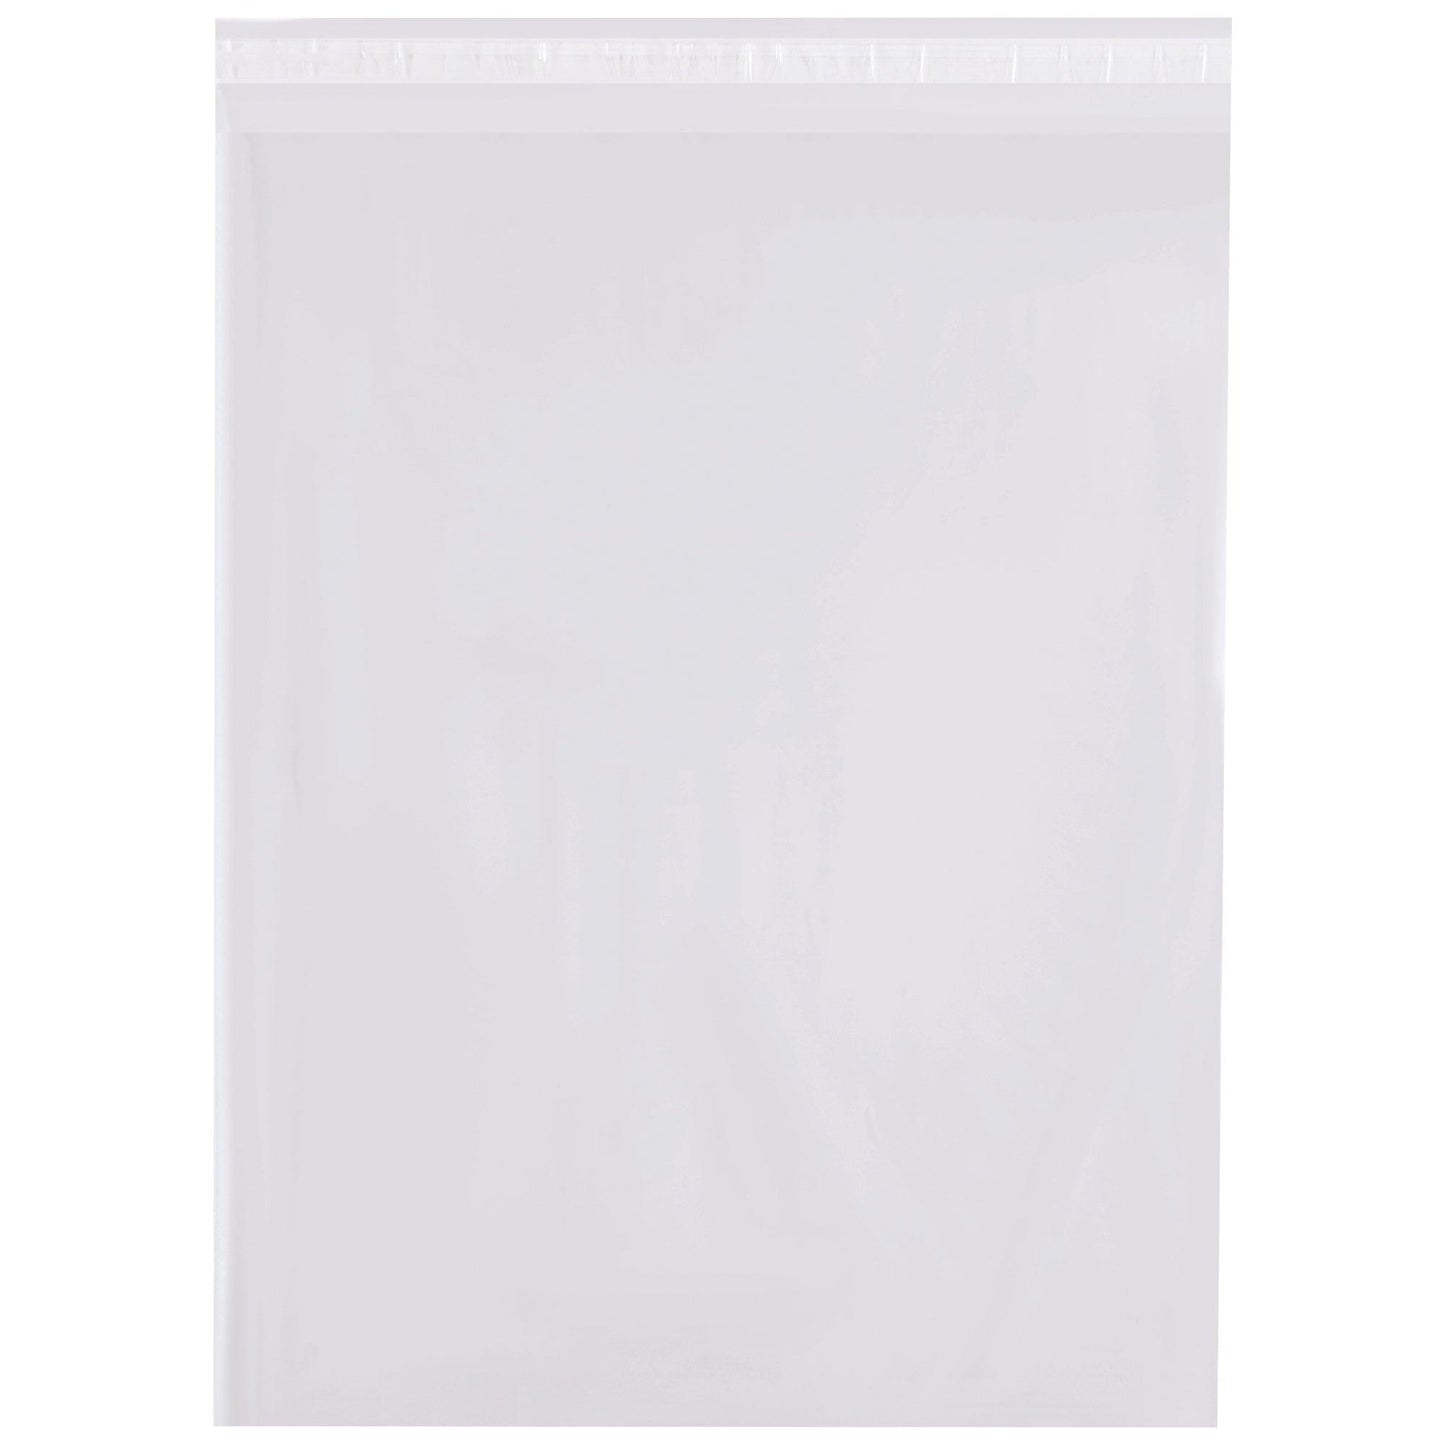 12 x 15" - 1.5 Mil Resealable Poly Bags - PRR121515